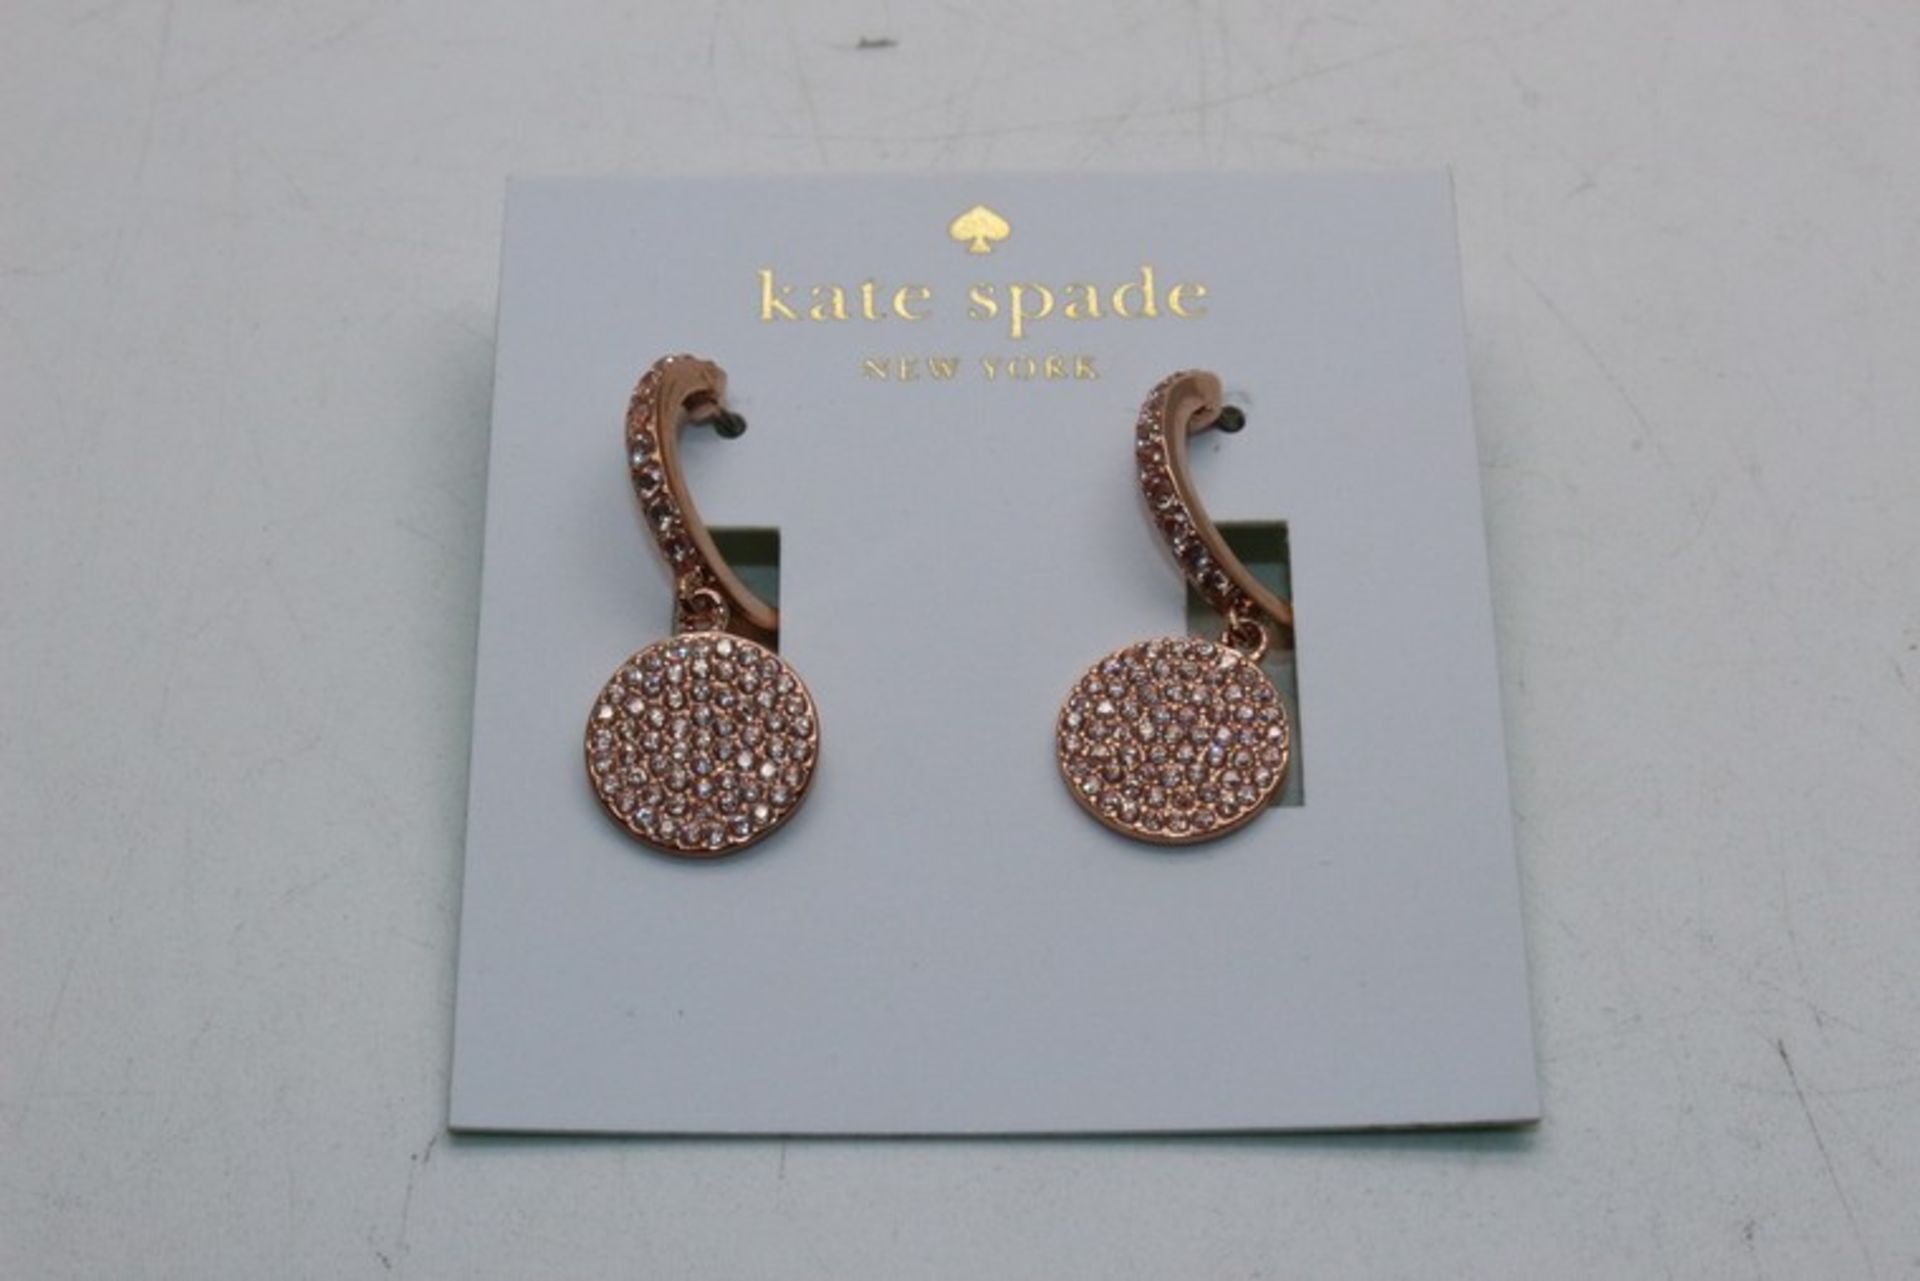 1 x BAGGED KATE SPADE NEW YORK ROSE GOLD SET OF EARRINGS (07.09.17) (2656067) *PLEASE NOTE THAT